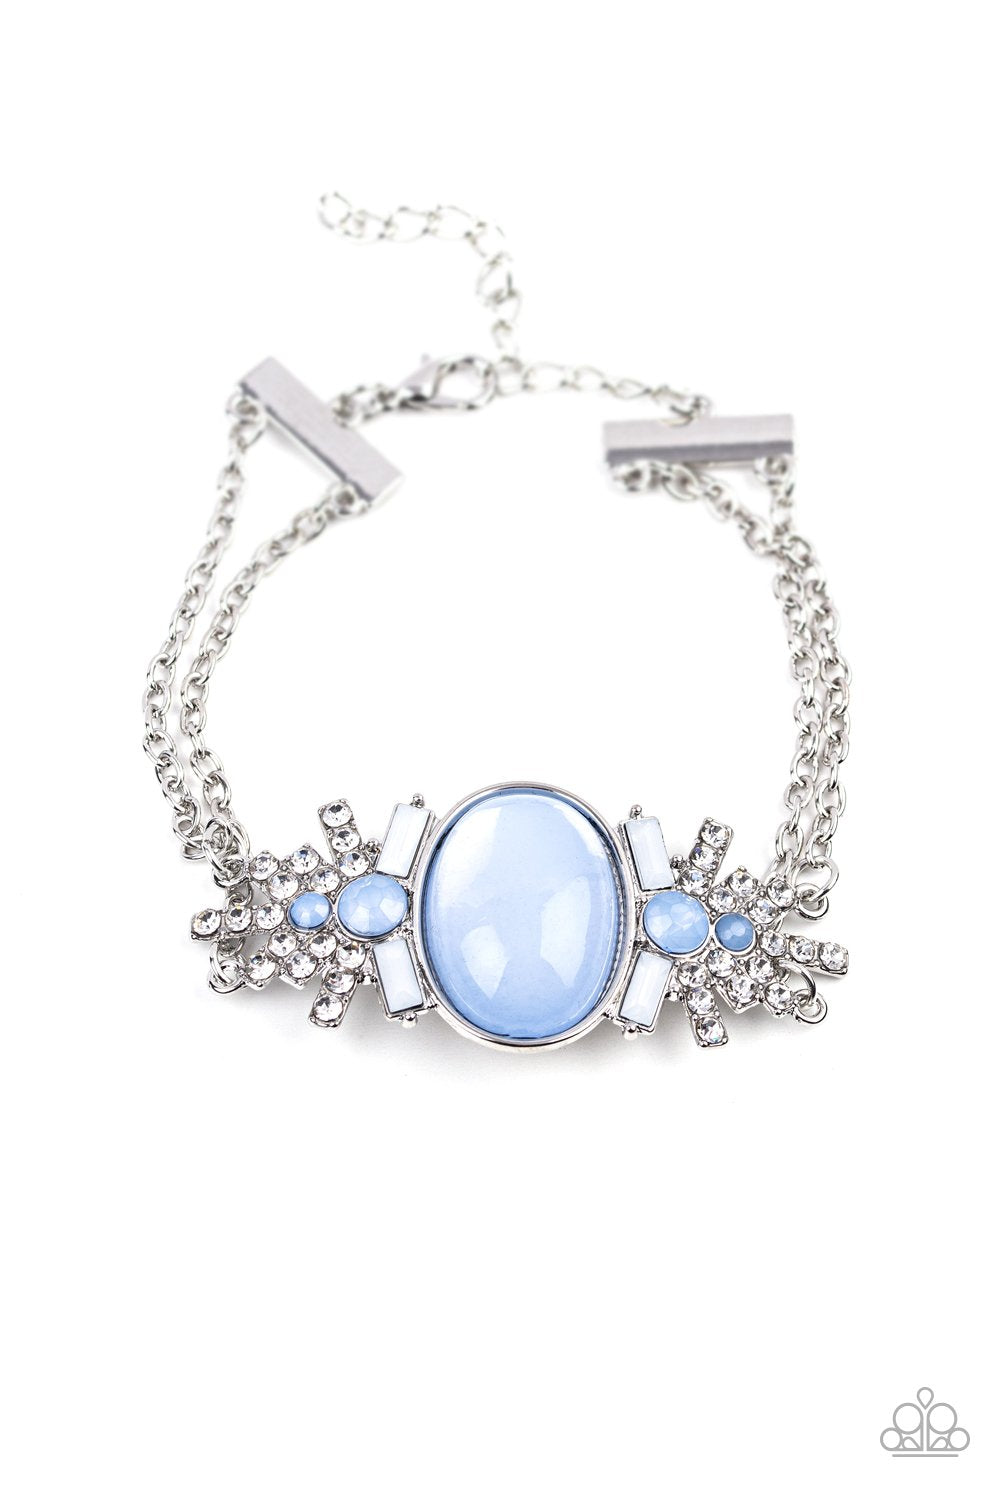 &lt;p&gt;Dotted with opaque blue and white beads, white rhinestone encrusted silver frames flare out from a dewy blue beaded center. Two dainty silver chains attach to the colorful centerpiece for a whimsically layered look. Features an adjustable clasp closure.&lt;/p&gt;
&lt;p&gt;&lt;i&gt;Sold as one individual.&lt;/i&gt;&lt;/p&gt;